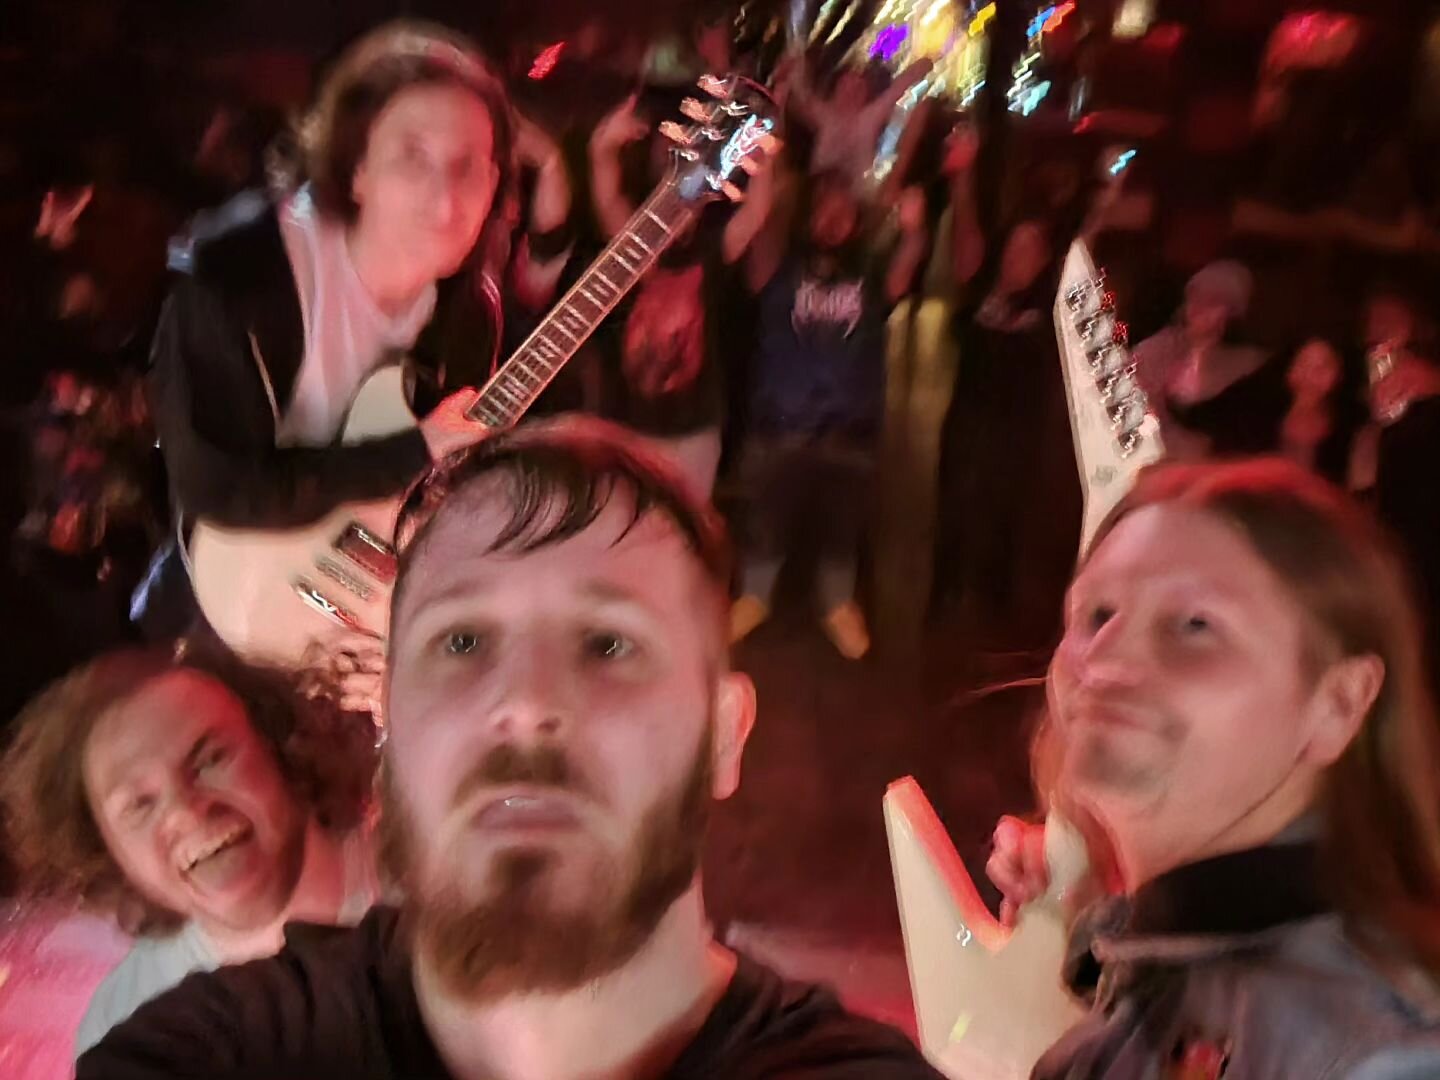 Thank you everyone that came out tonight. Don't let the sweaty, blurry, messy, selfie confuse you, as this was probably the best show in our career so far. Such amazing bands we shared the stage with at @legendsbar513
👇
Everyone go check out  @myfav